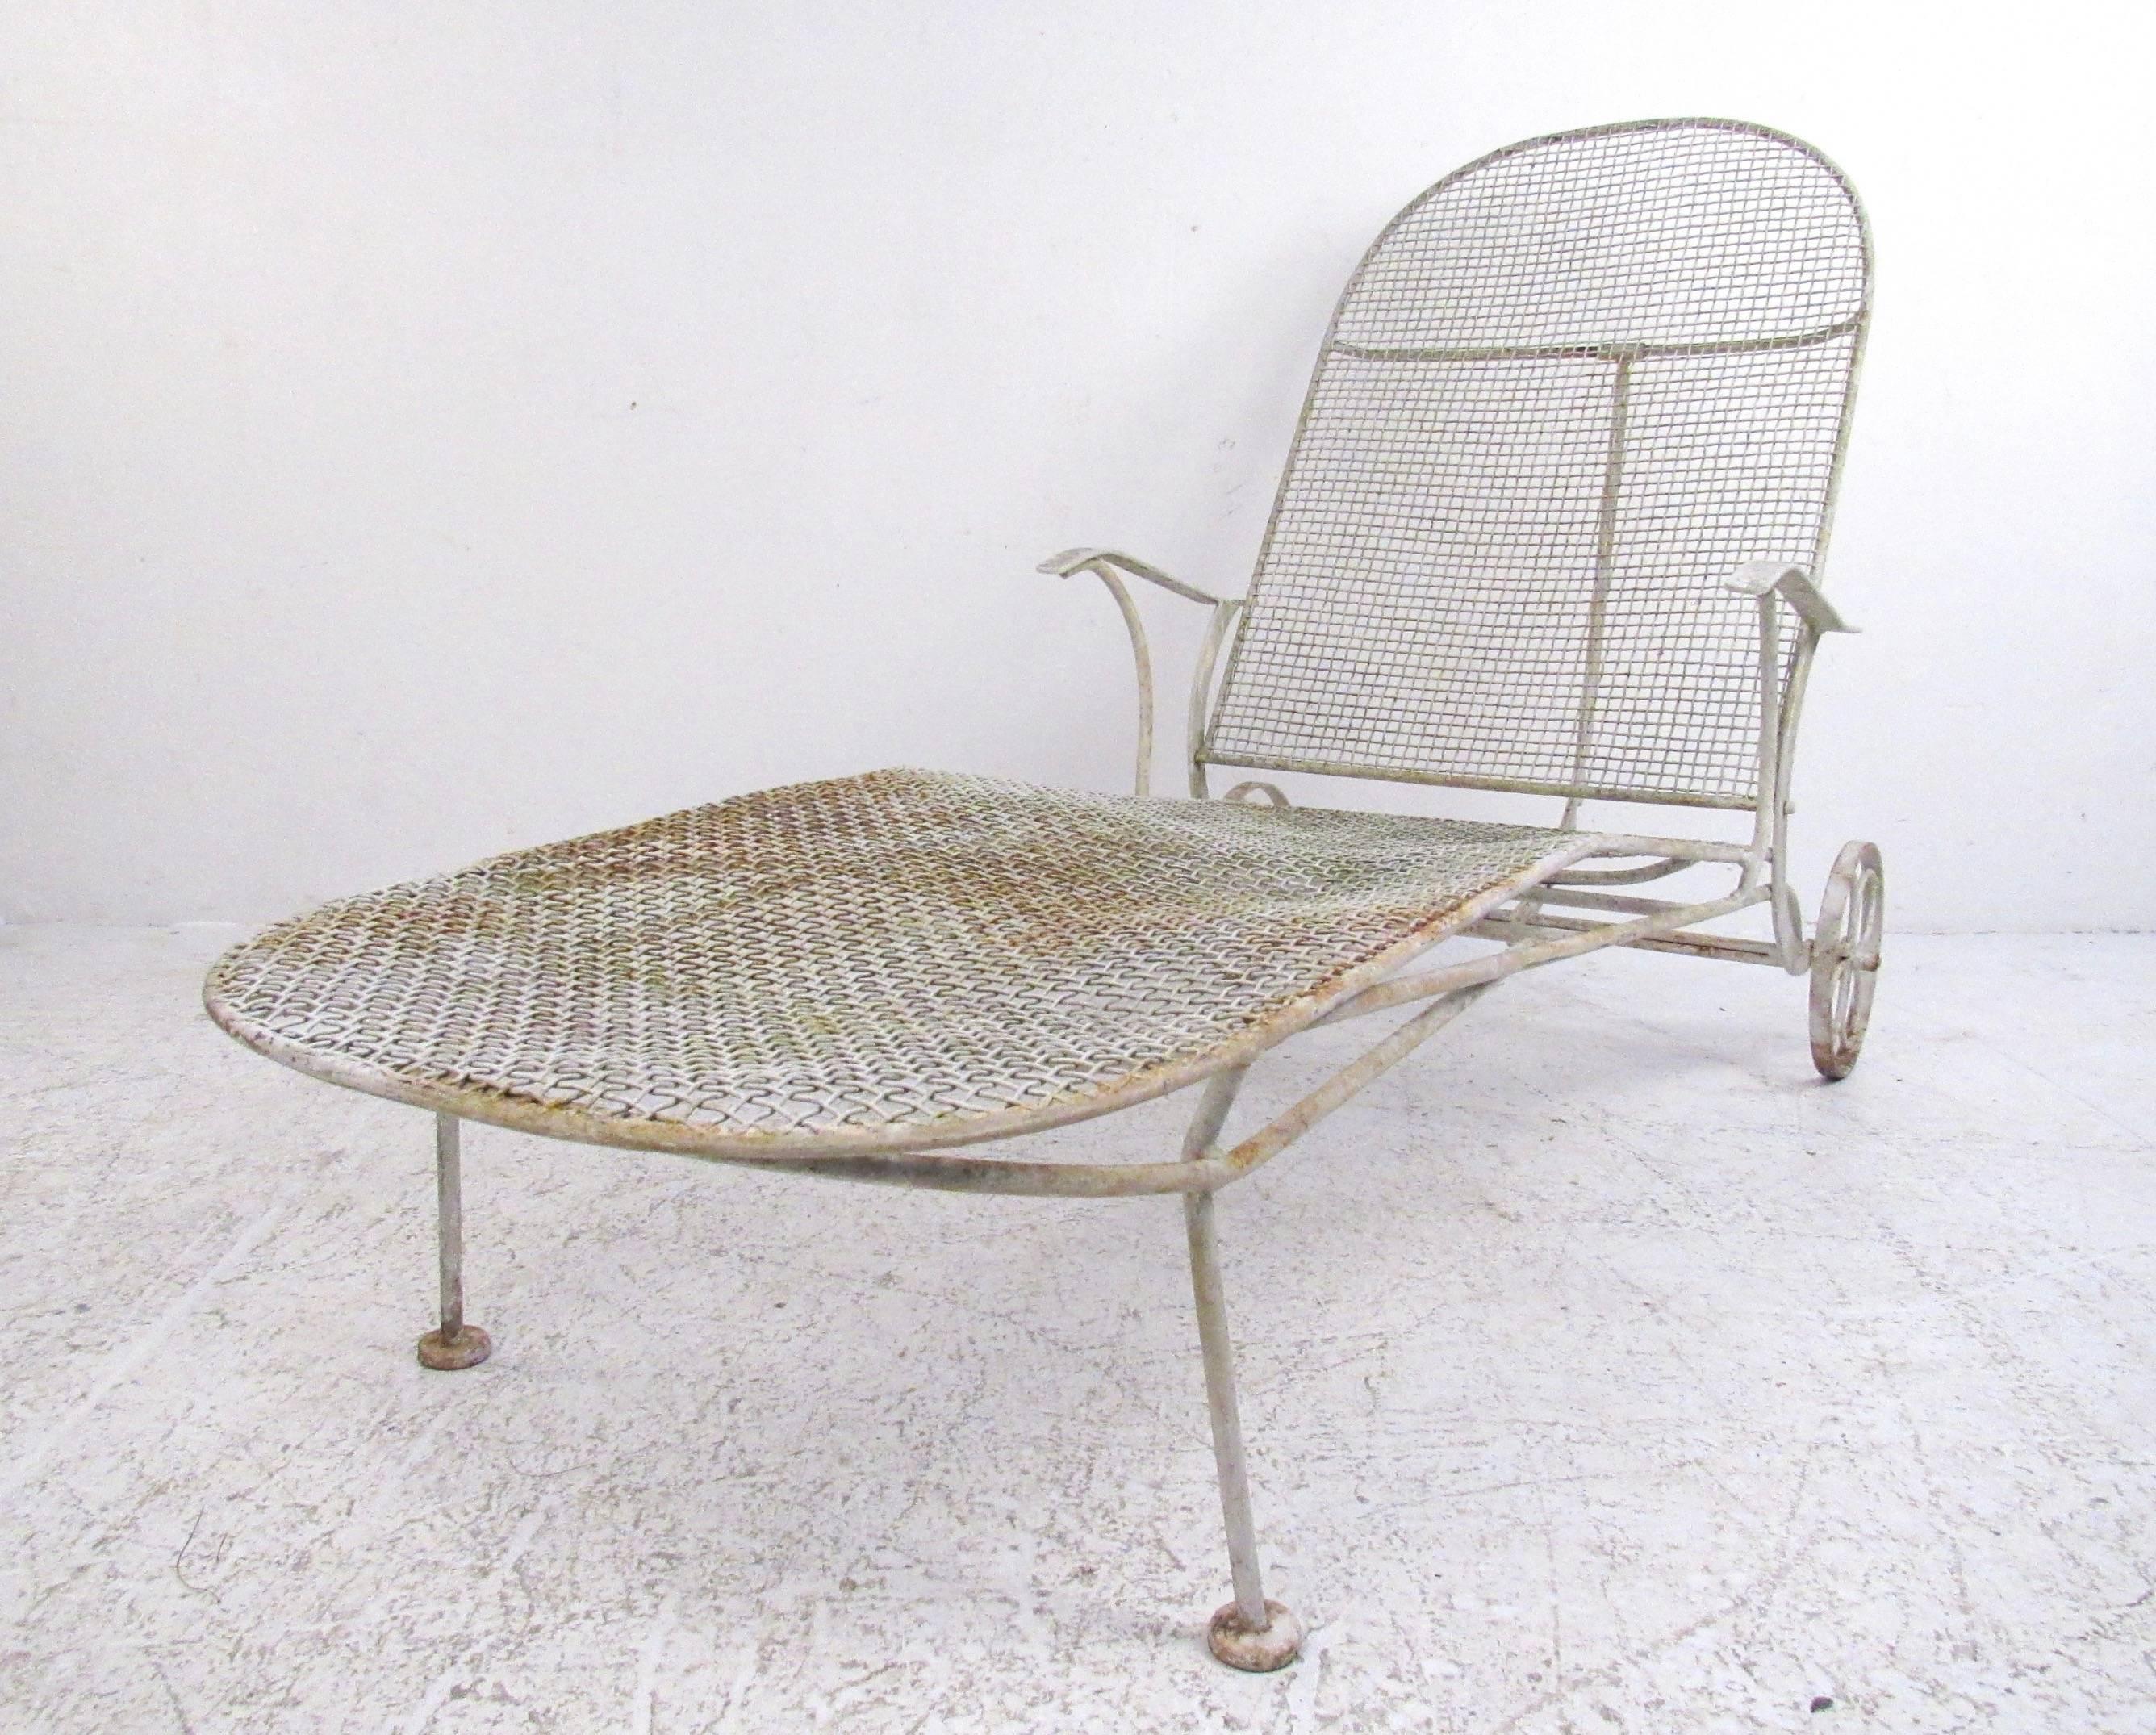 This stylish mid-century patio lounge chair features the vintage design of Russell Woodard's Sculptura line of patio furniture. Iron construction pool lounge adjusts seat tilt from upright to flat, opening from 60deep to 77 inches deep. Shapely